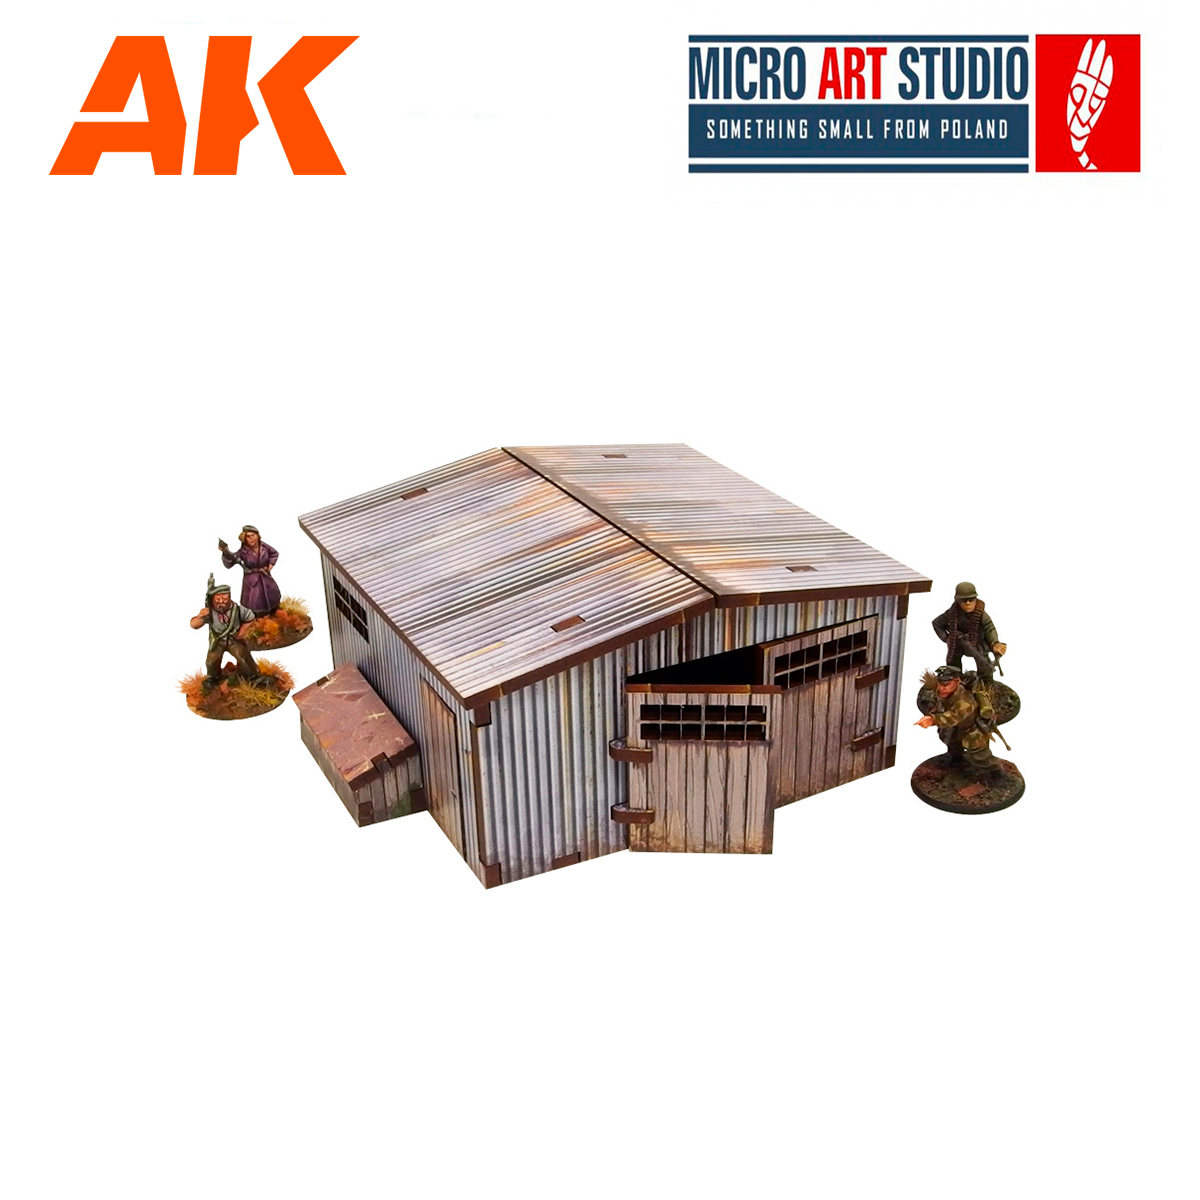 WW2 Normandy Large Tin Shed PREPAINTED